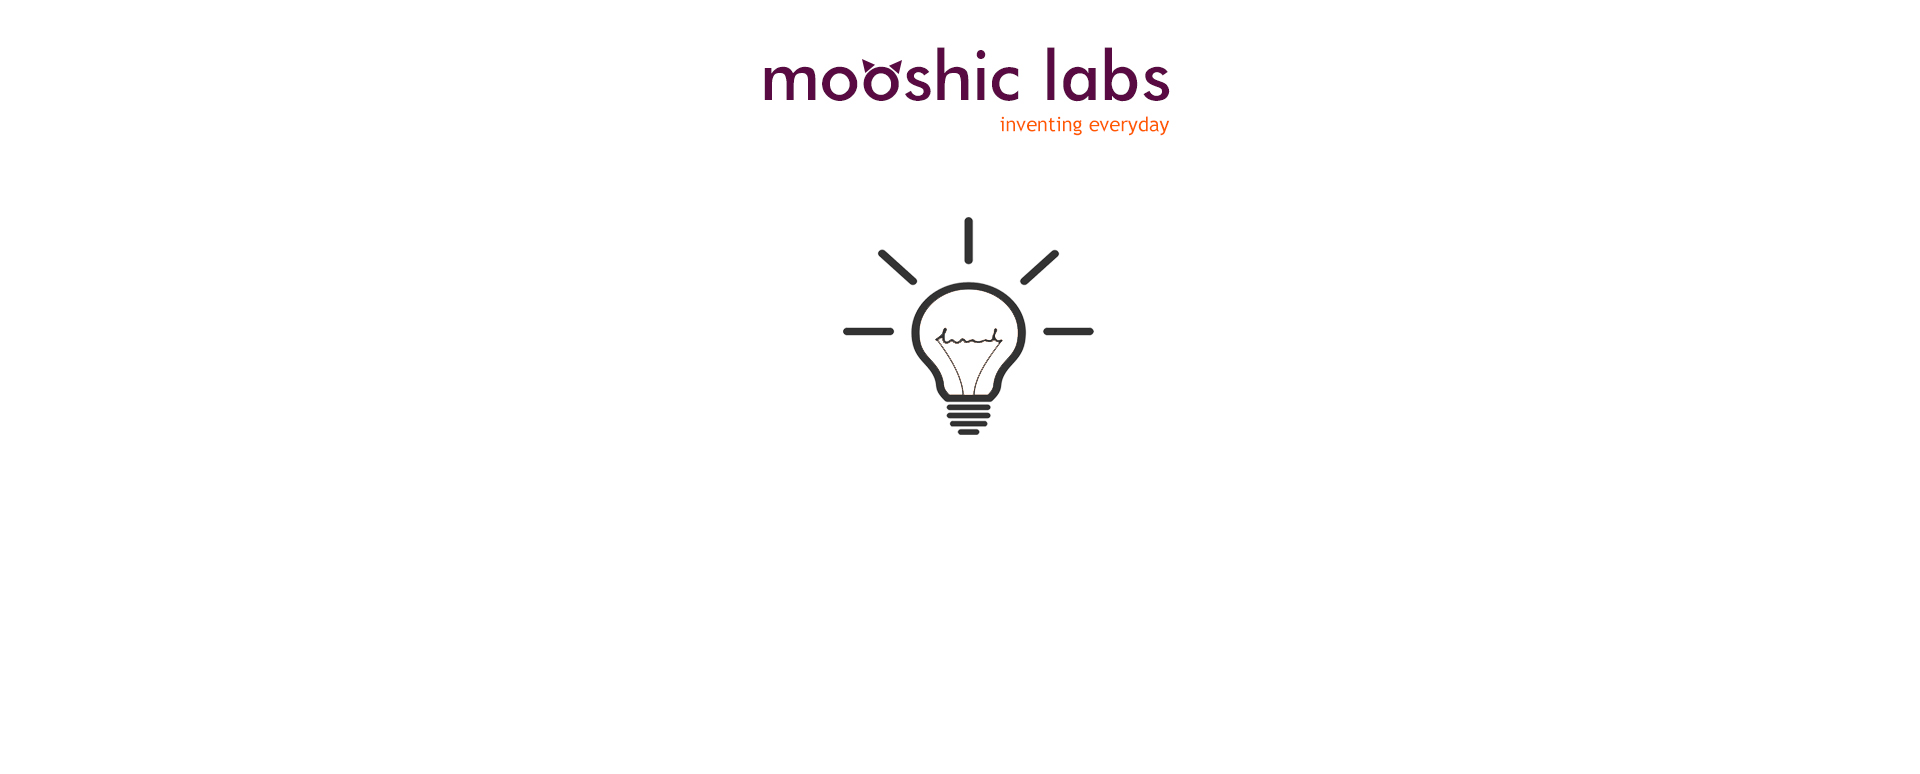 mooshic labs. inventing everyday.